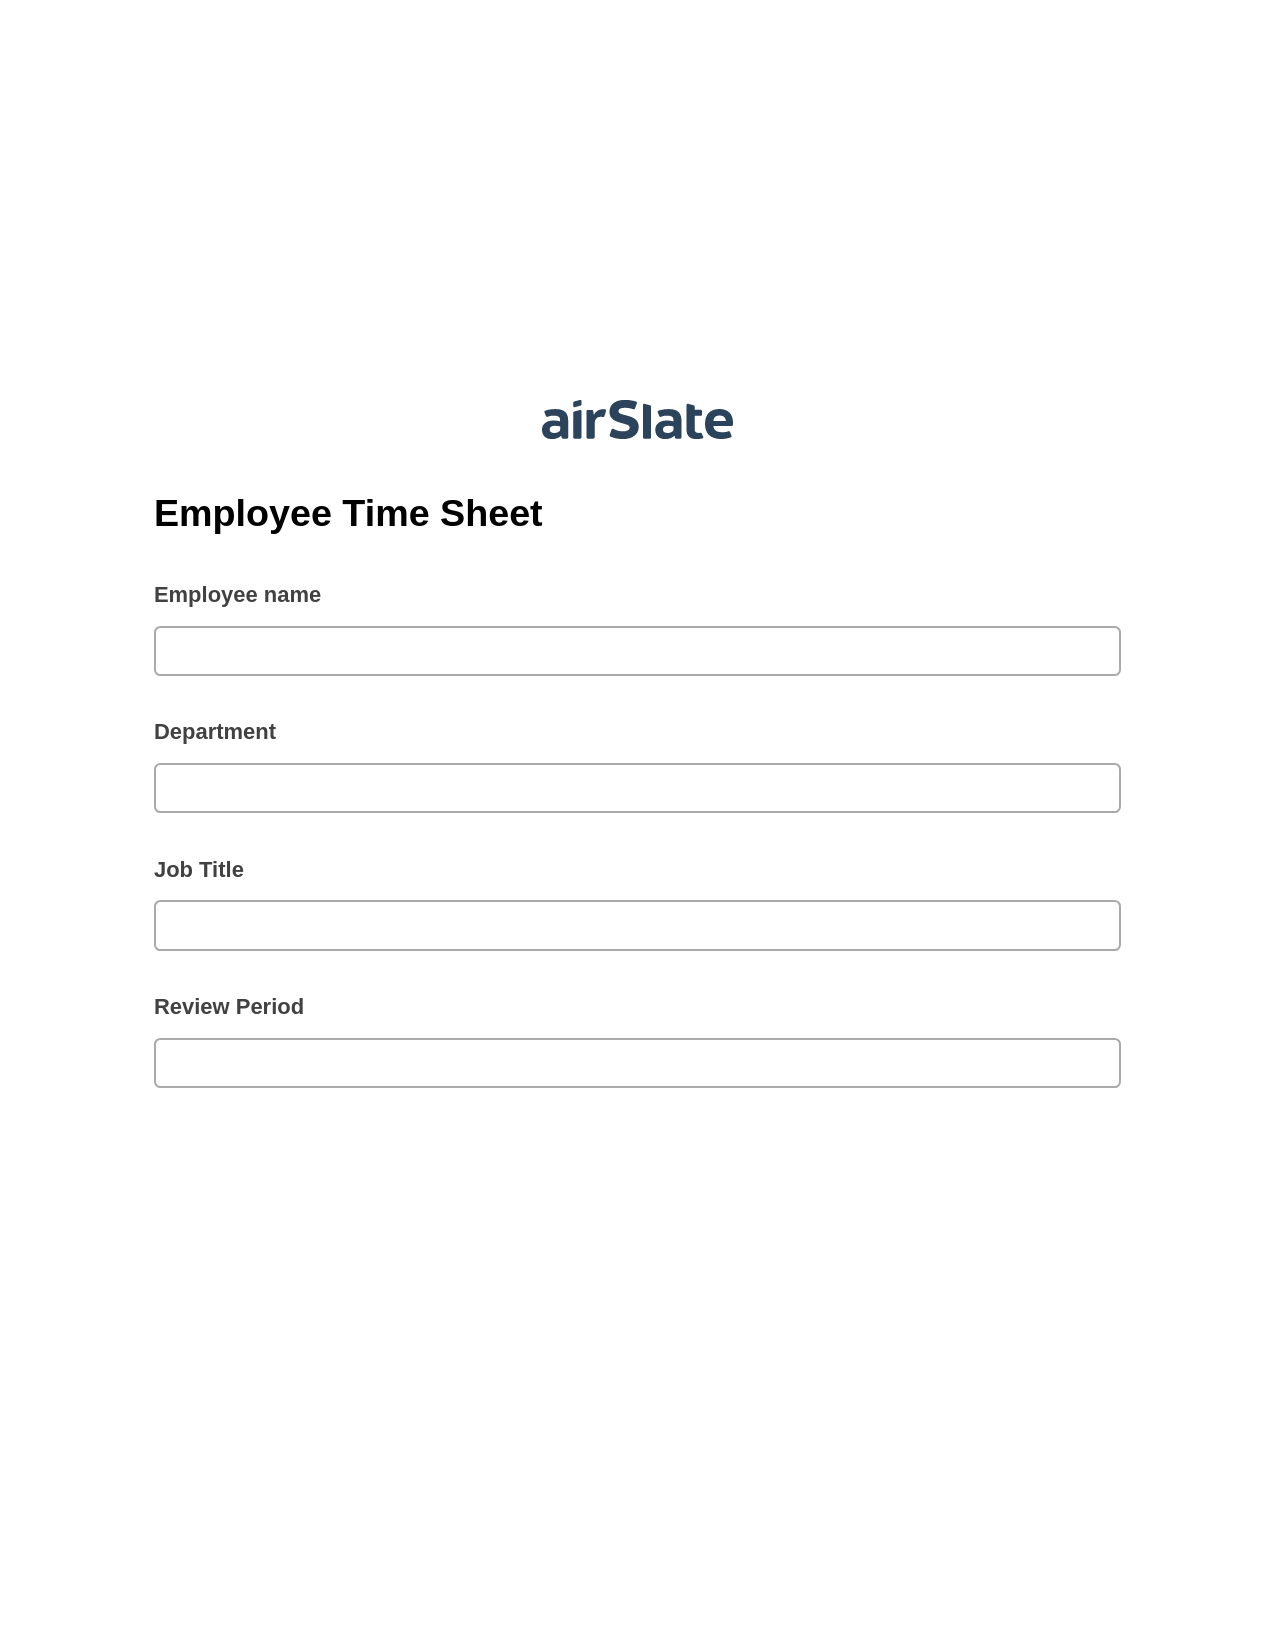 Employee Time Sheet Prefill from NetSuite records, Create Salesforce Records Bot, Export to Salesforce Record Bot